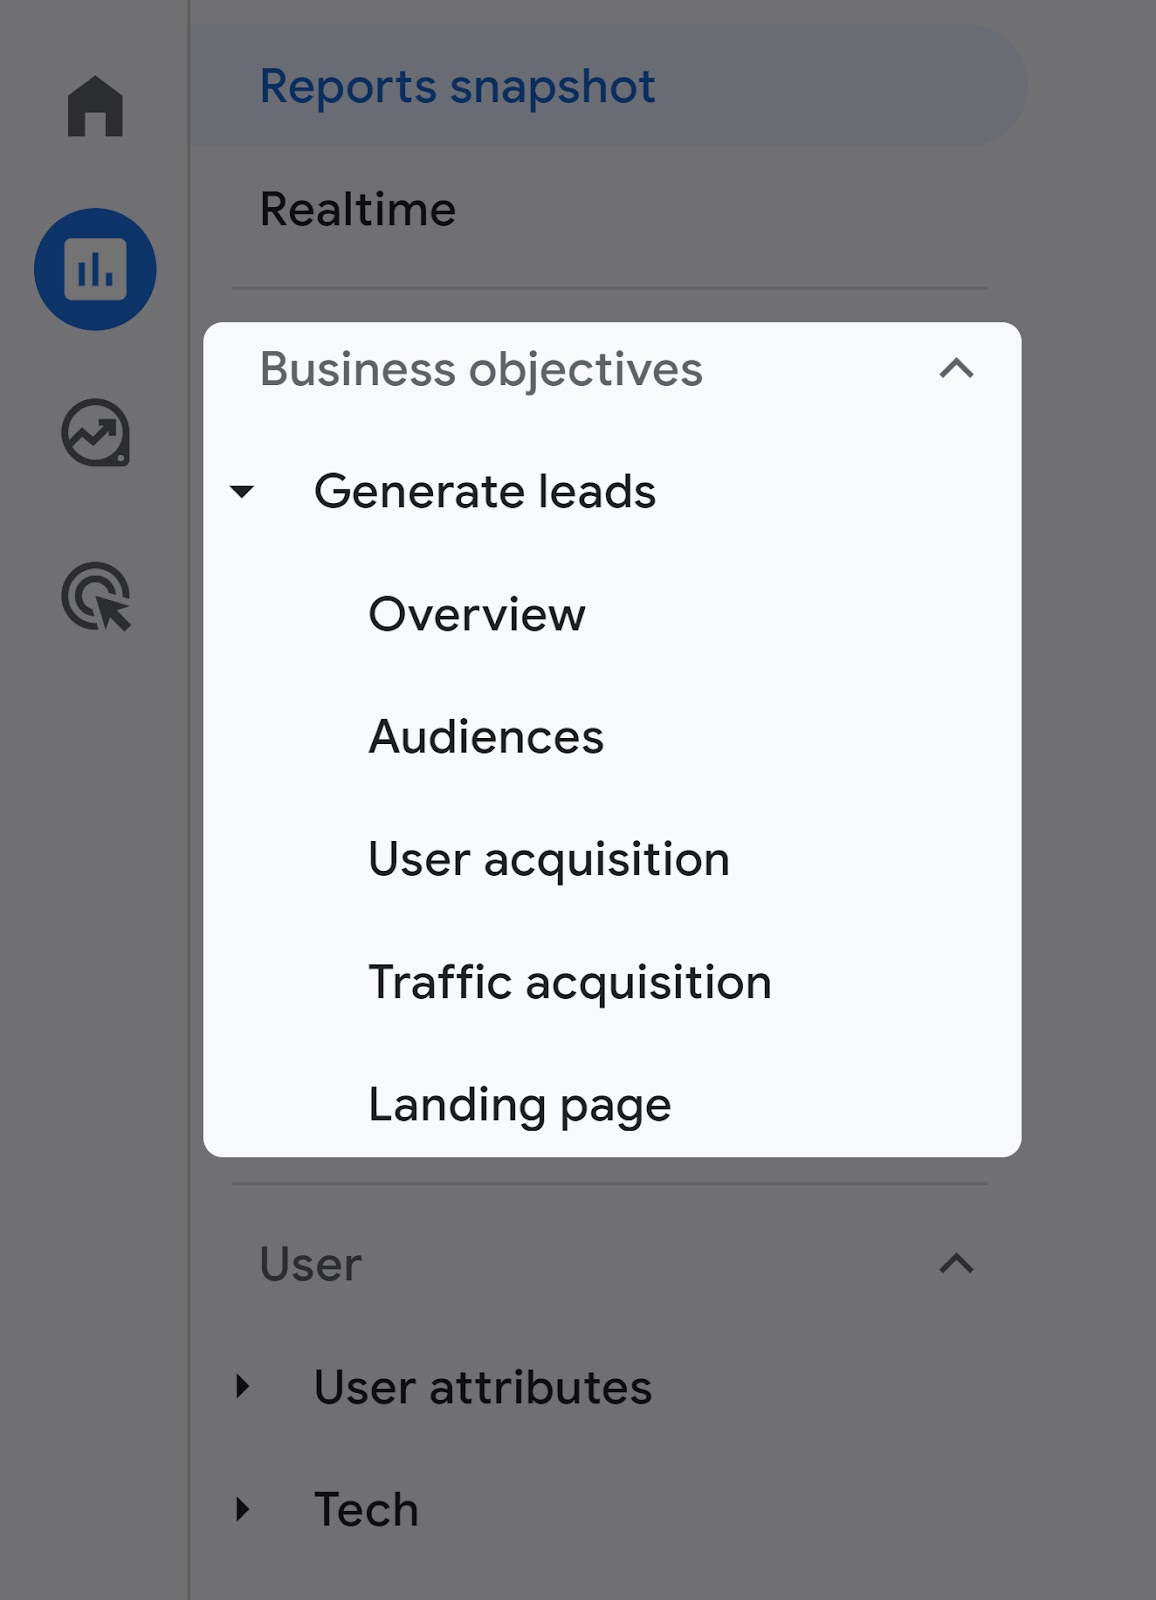 “Generate leads” collection on your dashboard